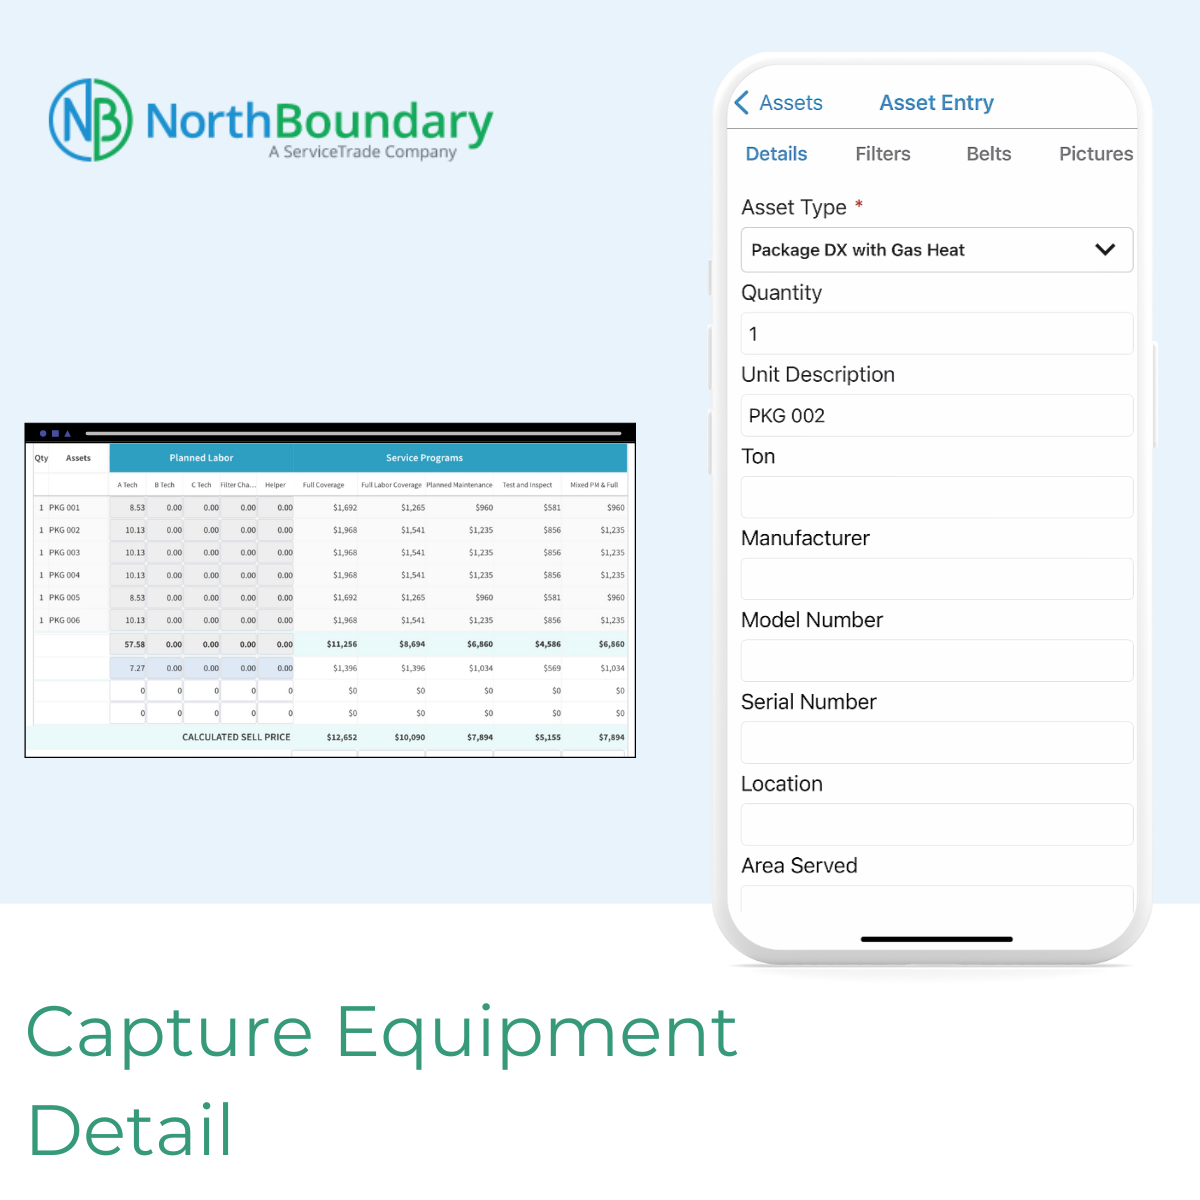 A NorthBoundary proposal uses the customer’s equipment list for accurate pricing so the process starts with an on-site equipment audit to capture every equipment detail with the mobile app.